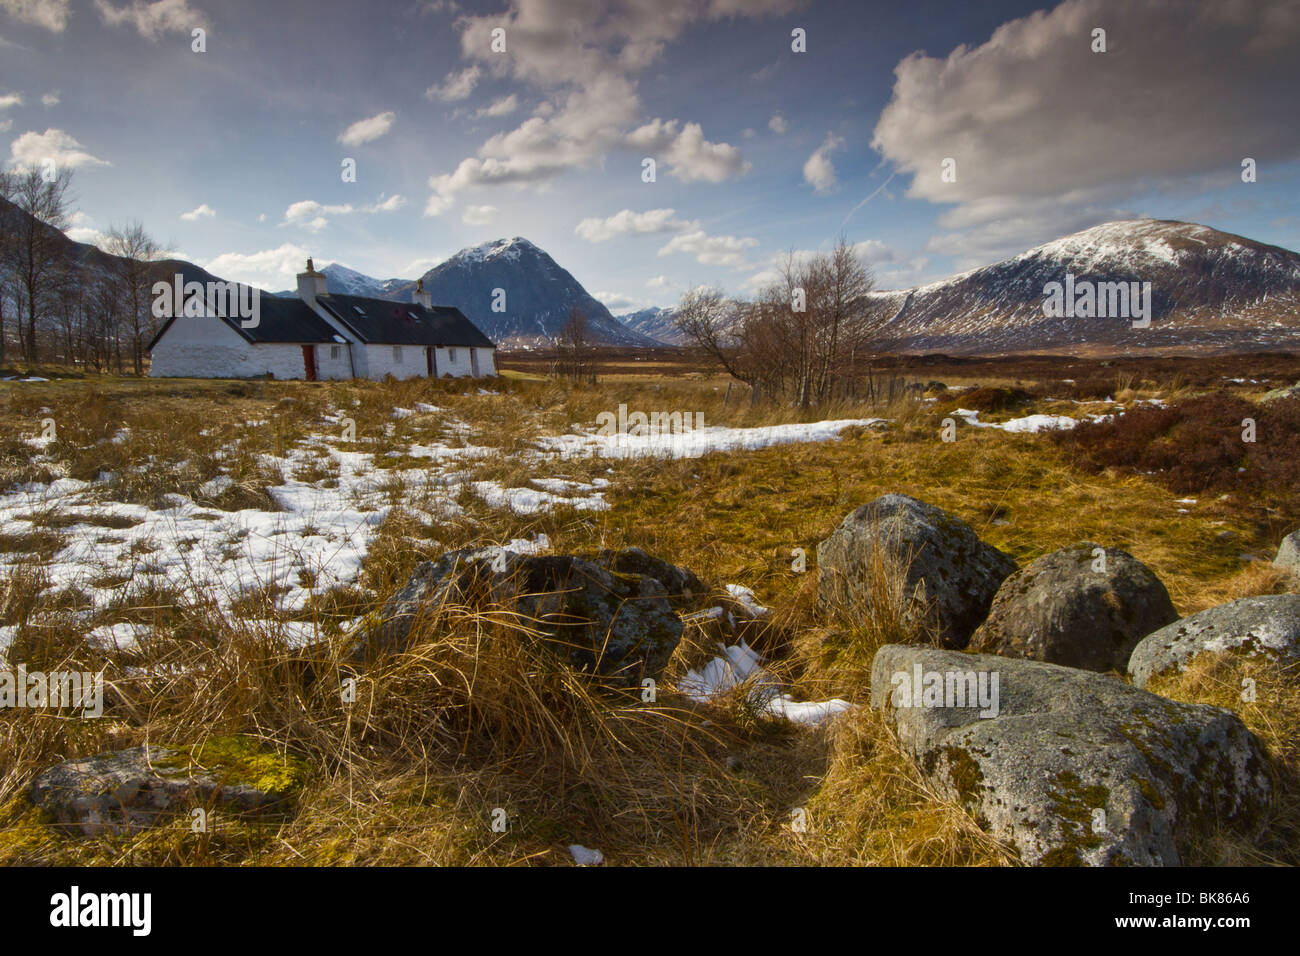 Black Rock Cottage sits beside the road that leads to the glencoe ski centre. The mountain behind is Buchaille Etive Mor. Stock Photo